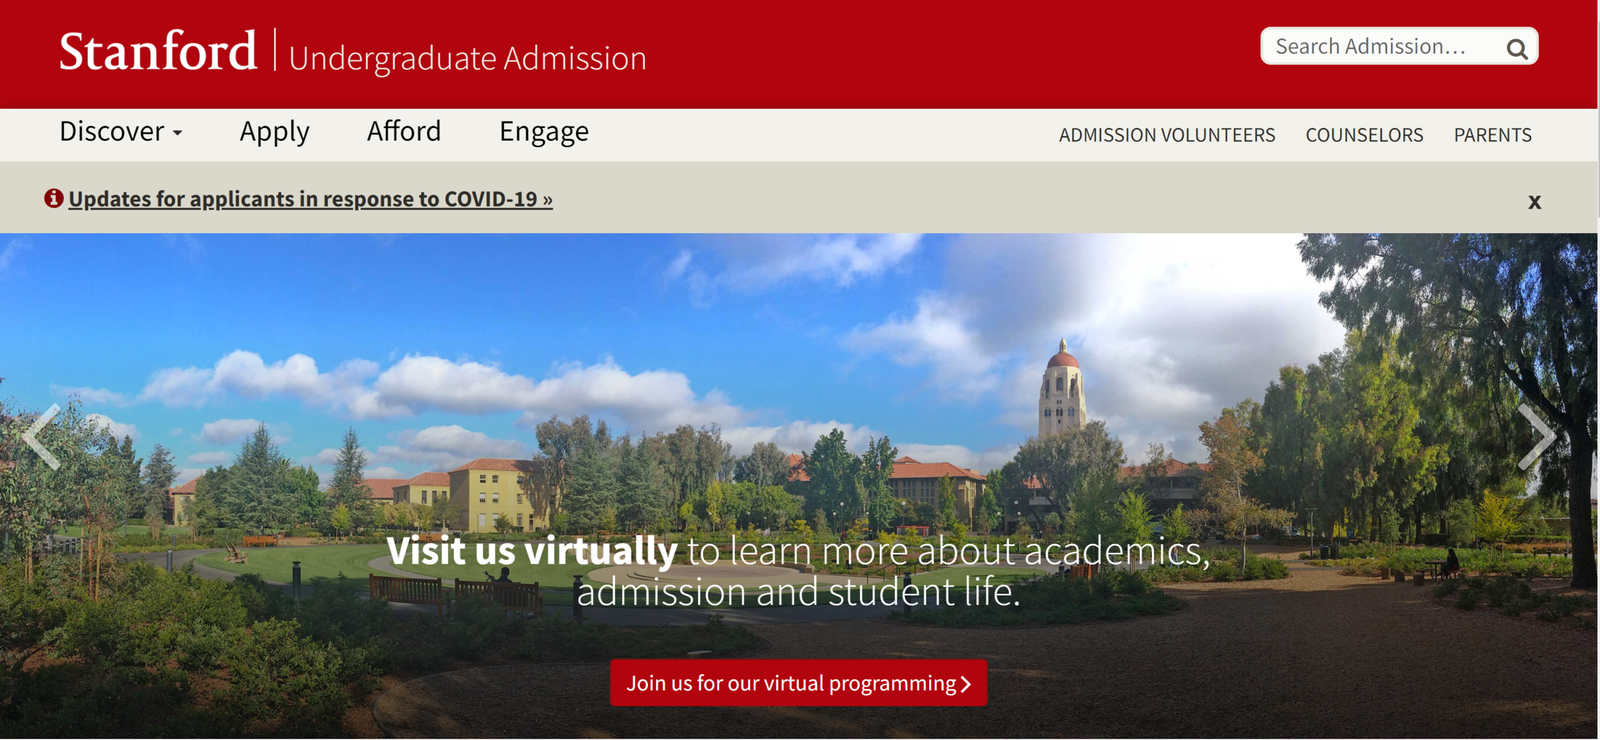 Stanford Early Action Acceptance Rate & Decision Date